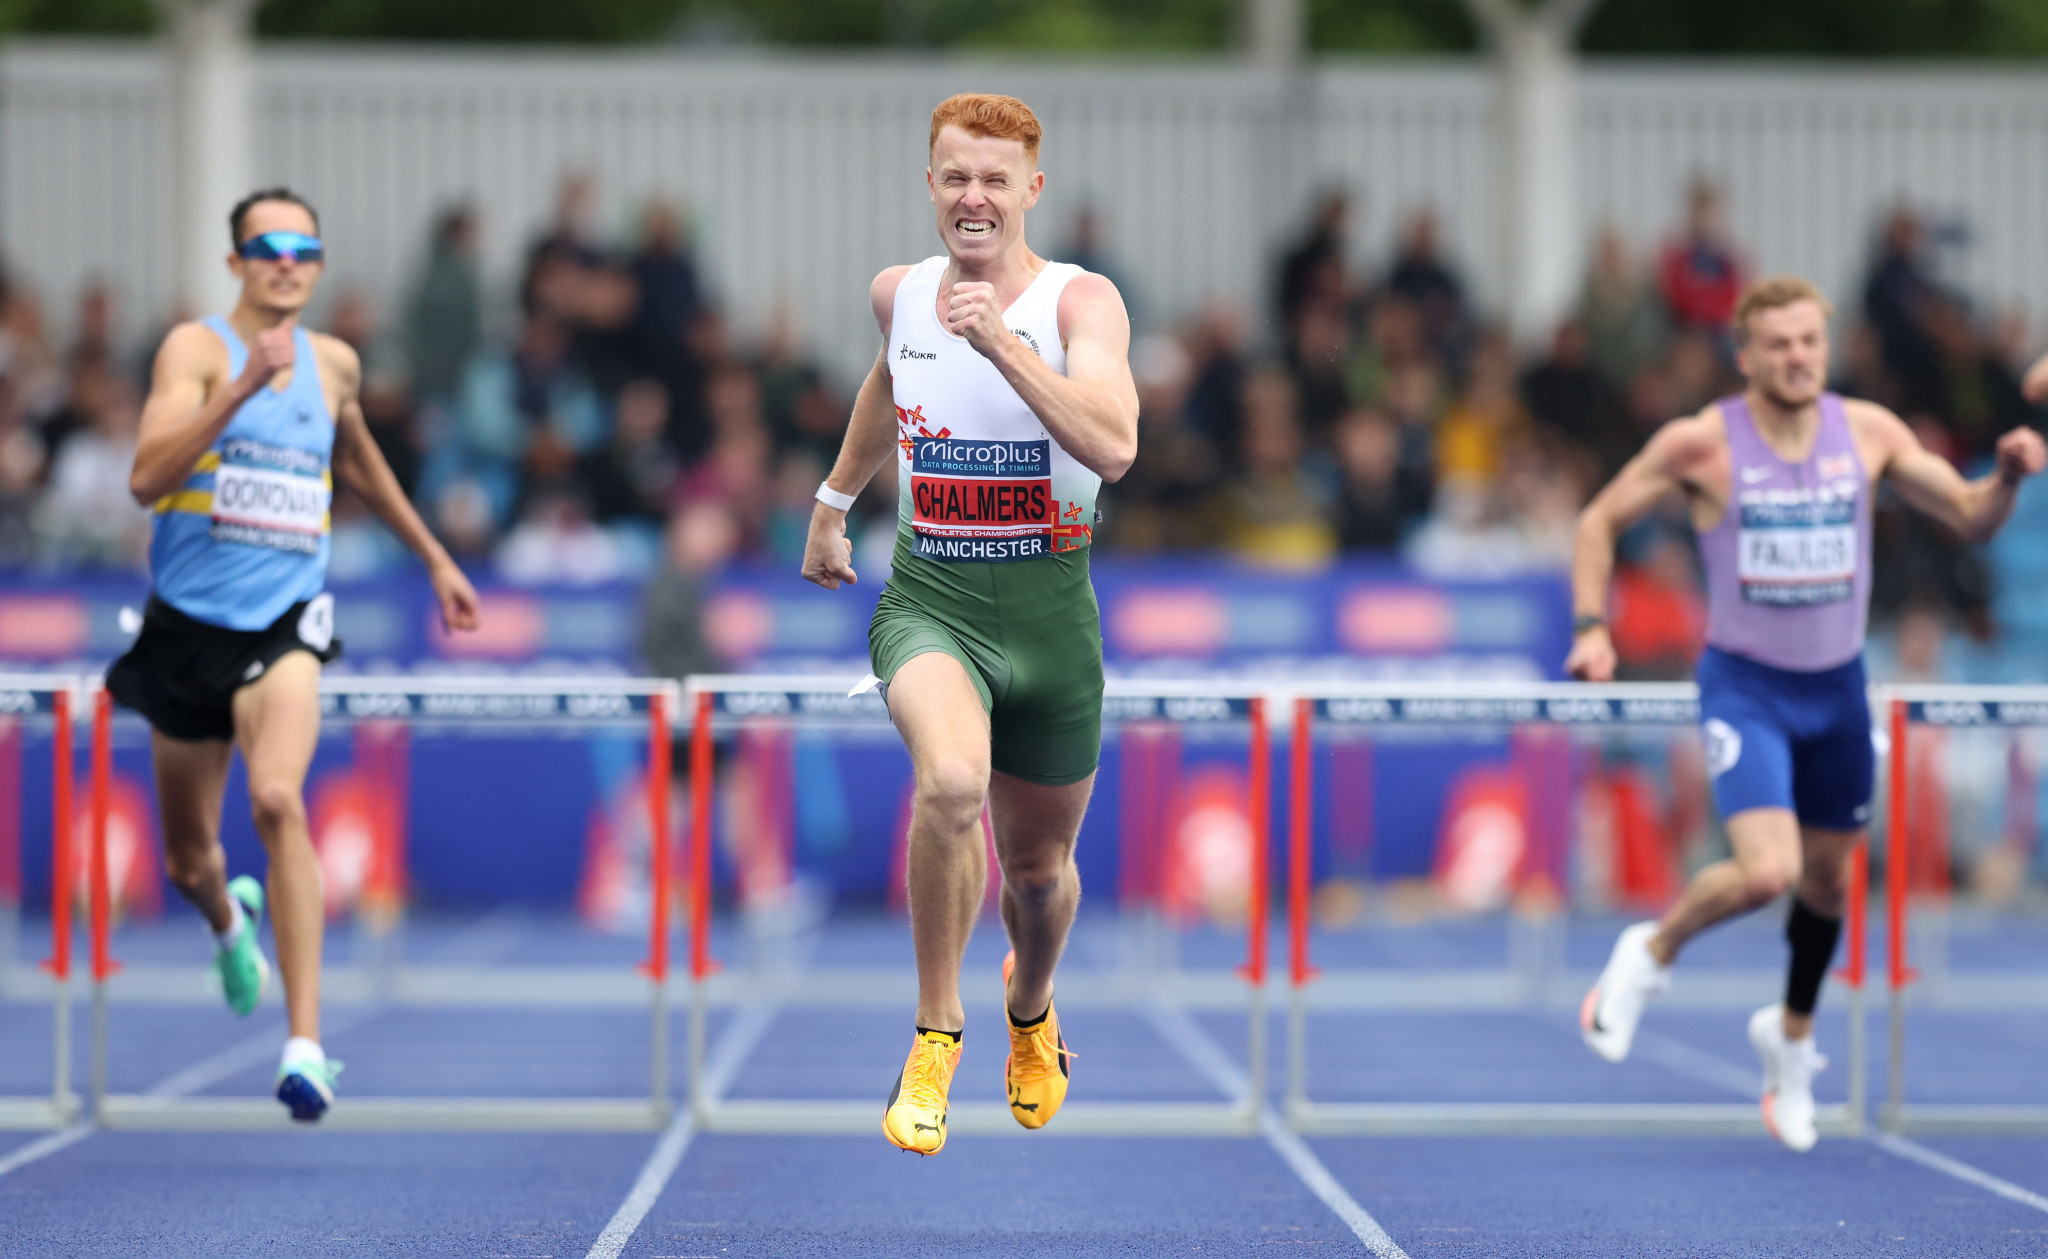 Guernsey-born Alastair Chalmers won the men's 400m hurdles final. GETTY IMAGES